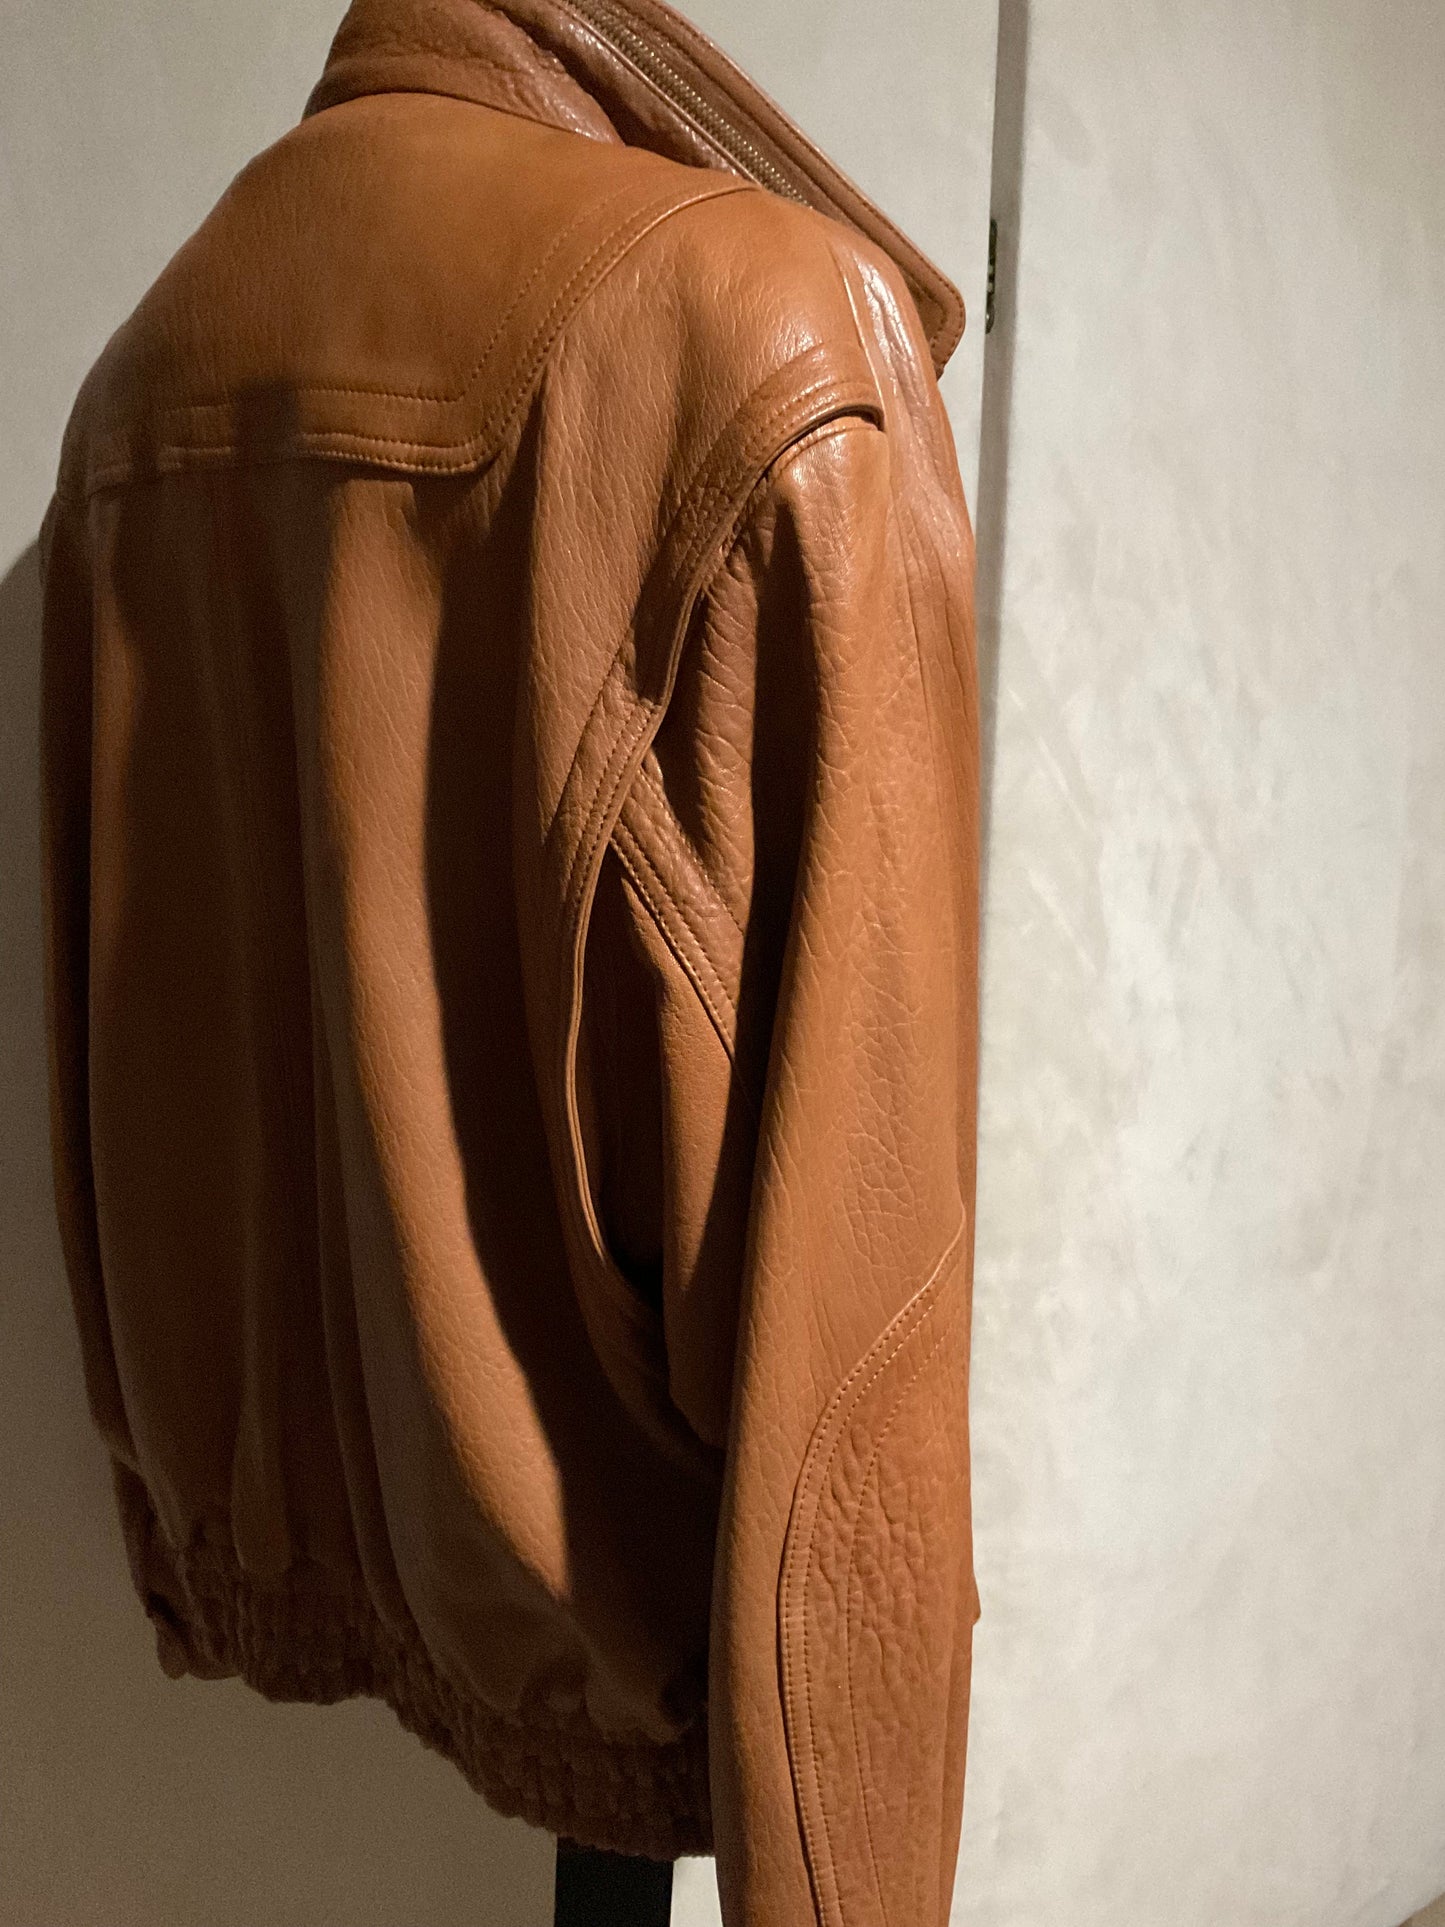 R P LEATHER JACKET / BROWN RUST / MEDIUM / REMOVABLE COLLAR / MADE IN ITALY